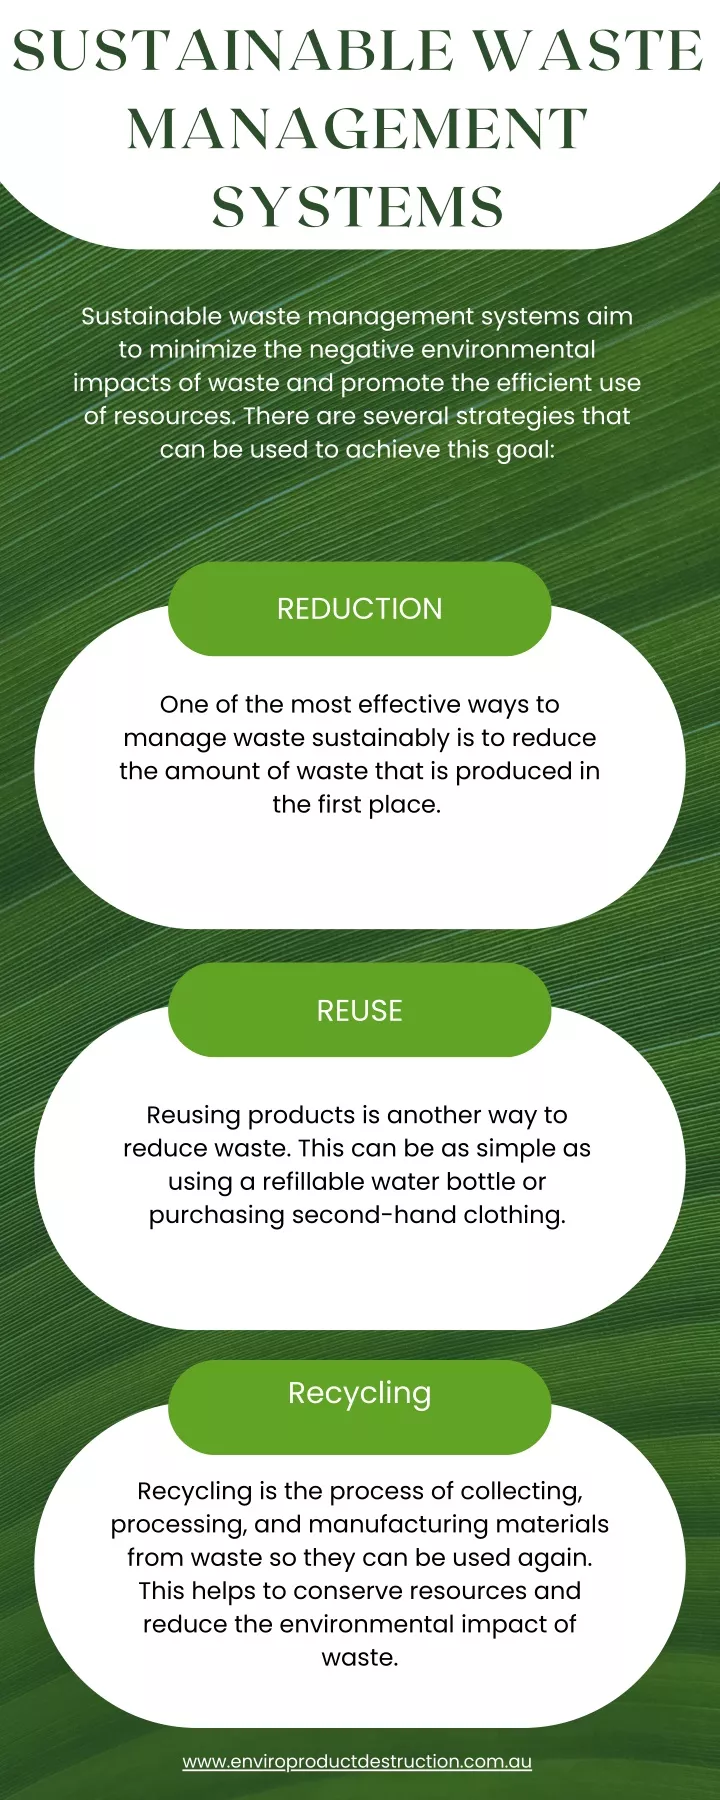 sustainable waste management systems